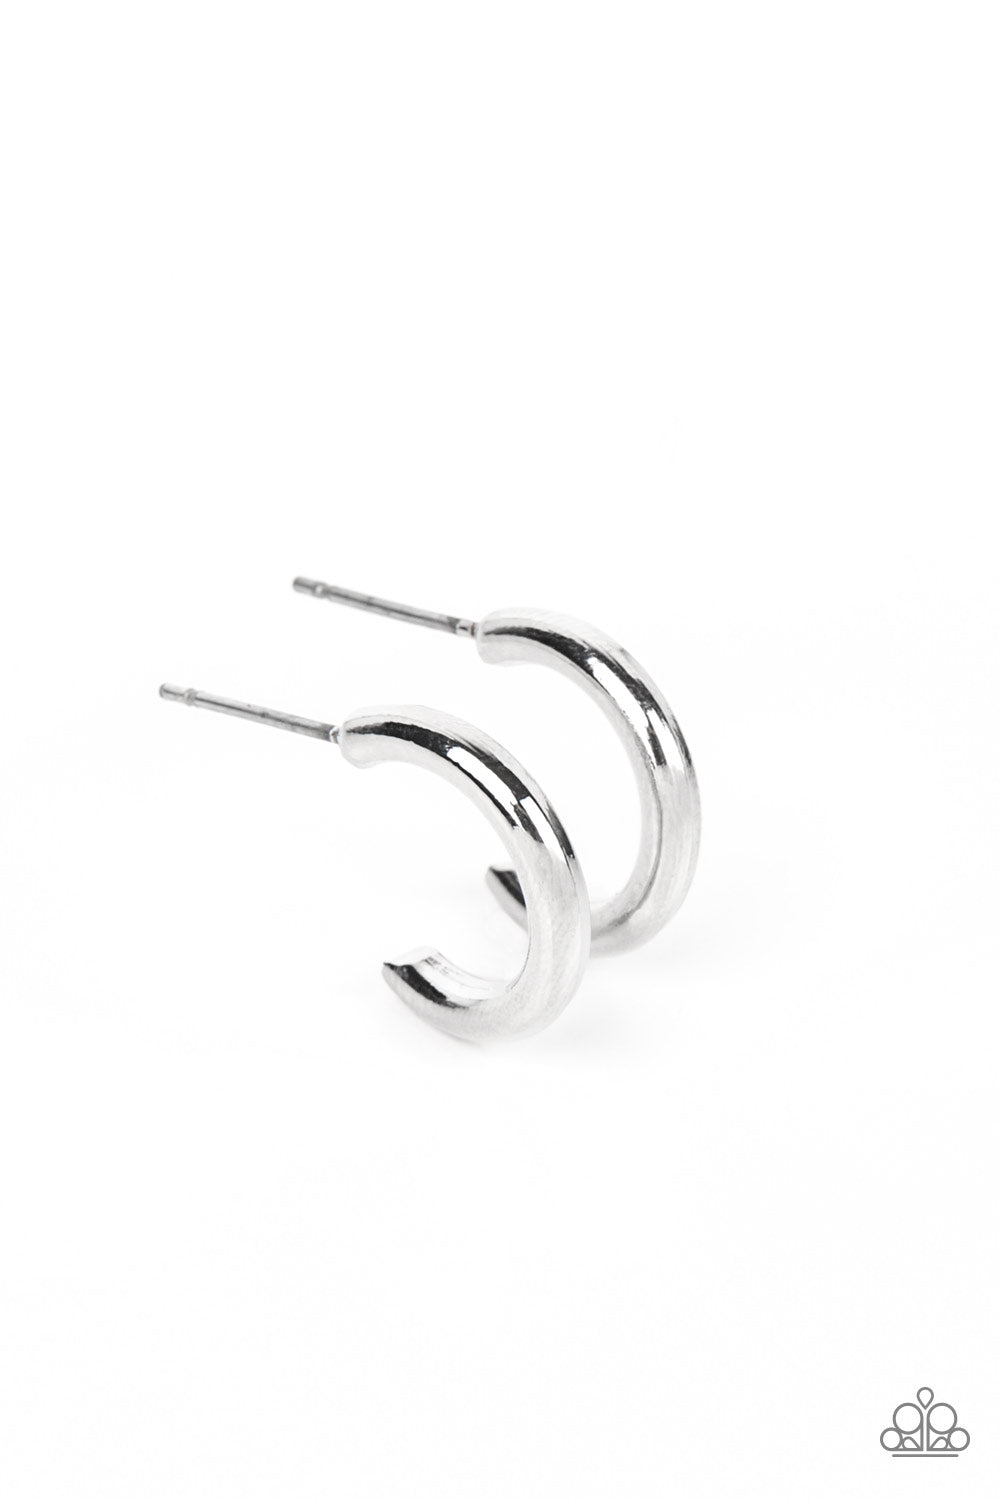 Small-Scale Shimmer Silver Earring